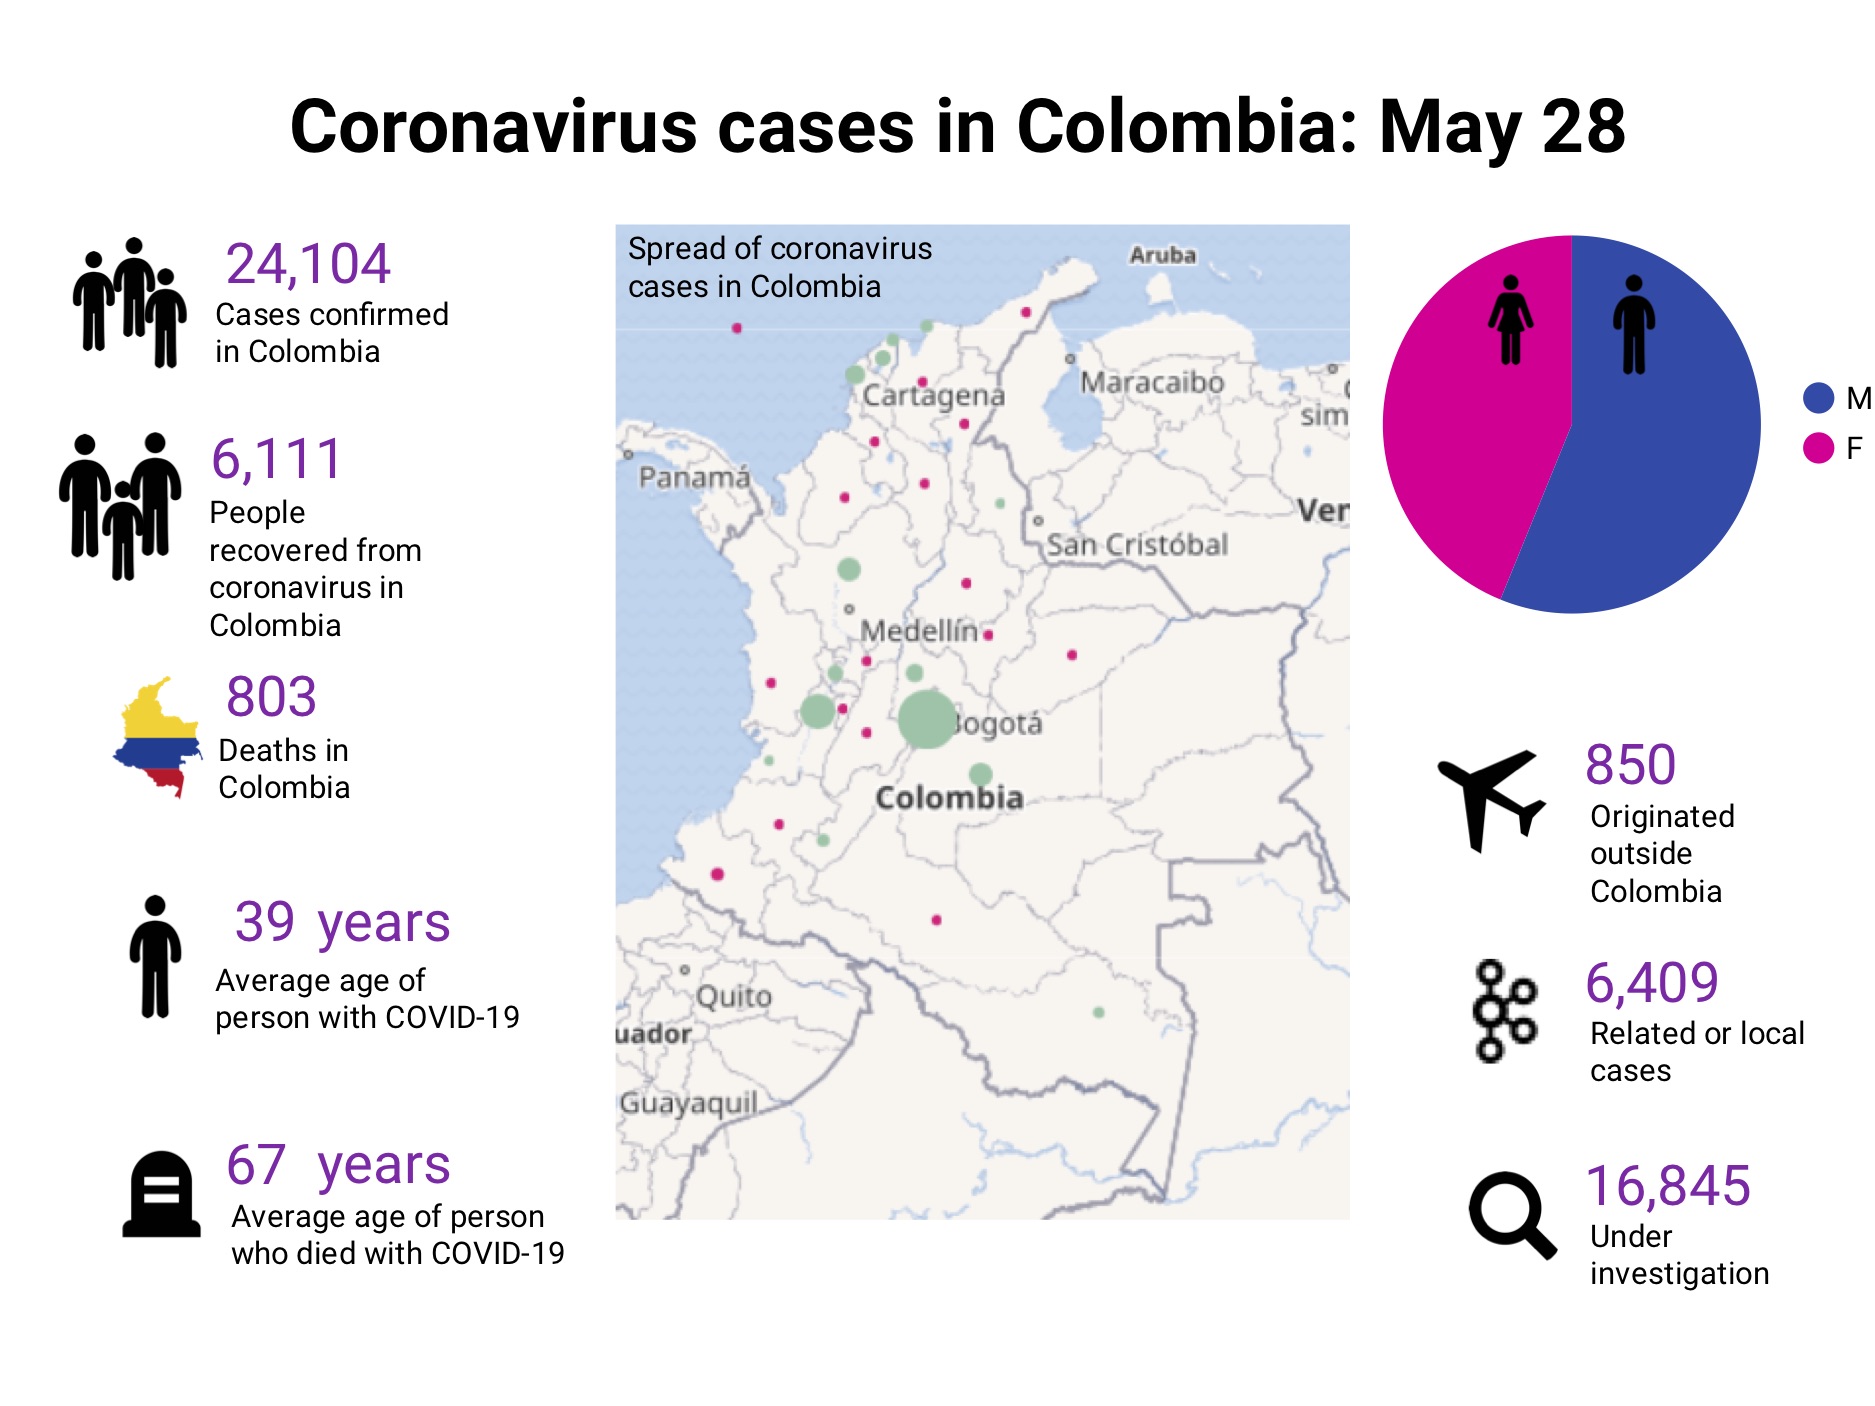 Coronavirus Colombia: New phase of lockdown to begin in June – but will it work nationwide?